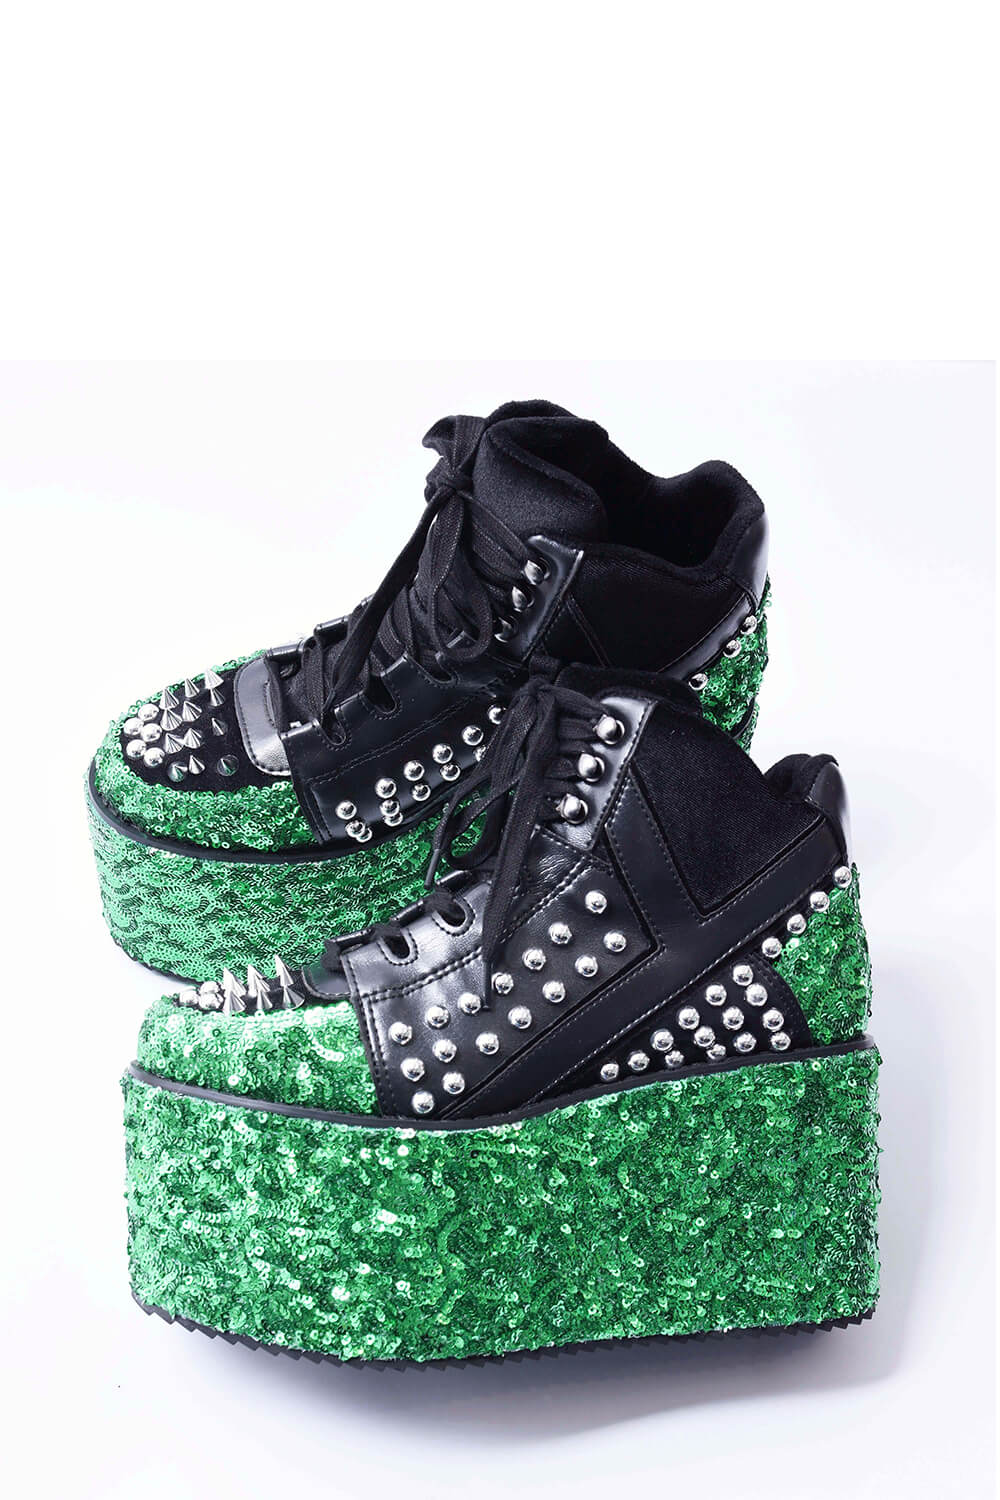 Green Sequined Lace Up Platform Sneakers With Studded Details - Black